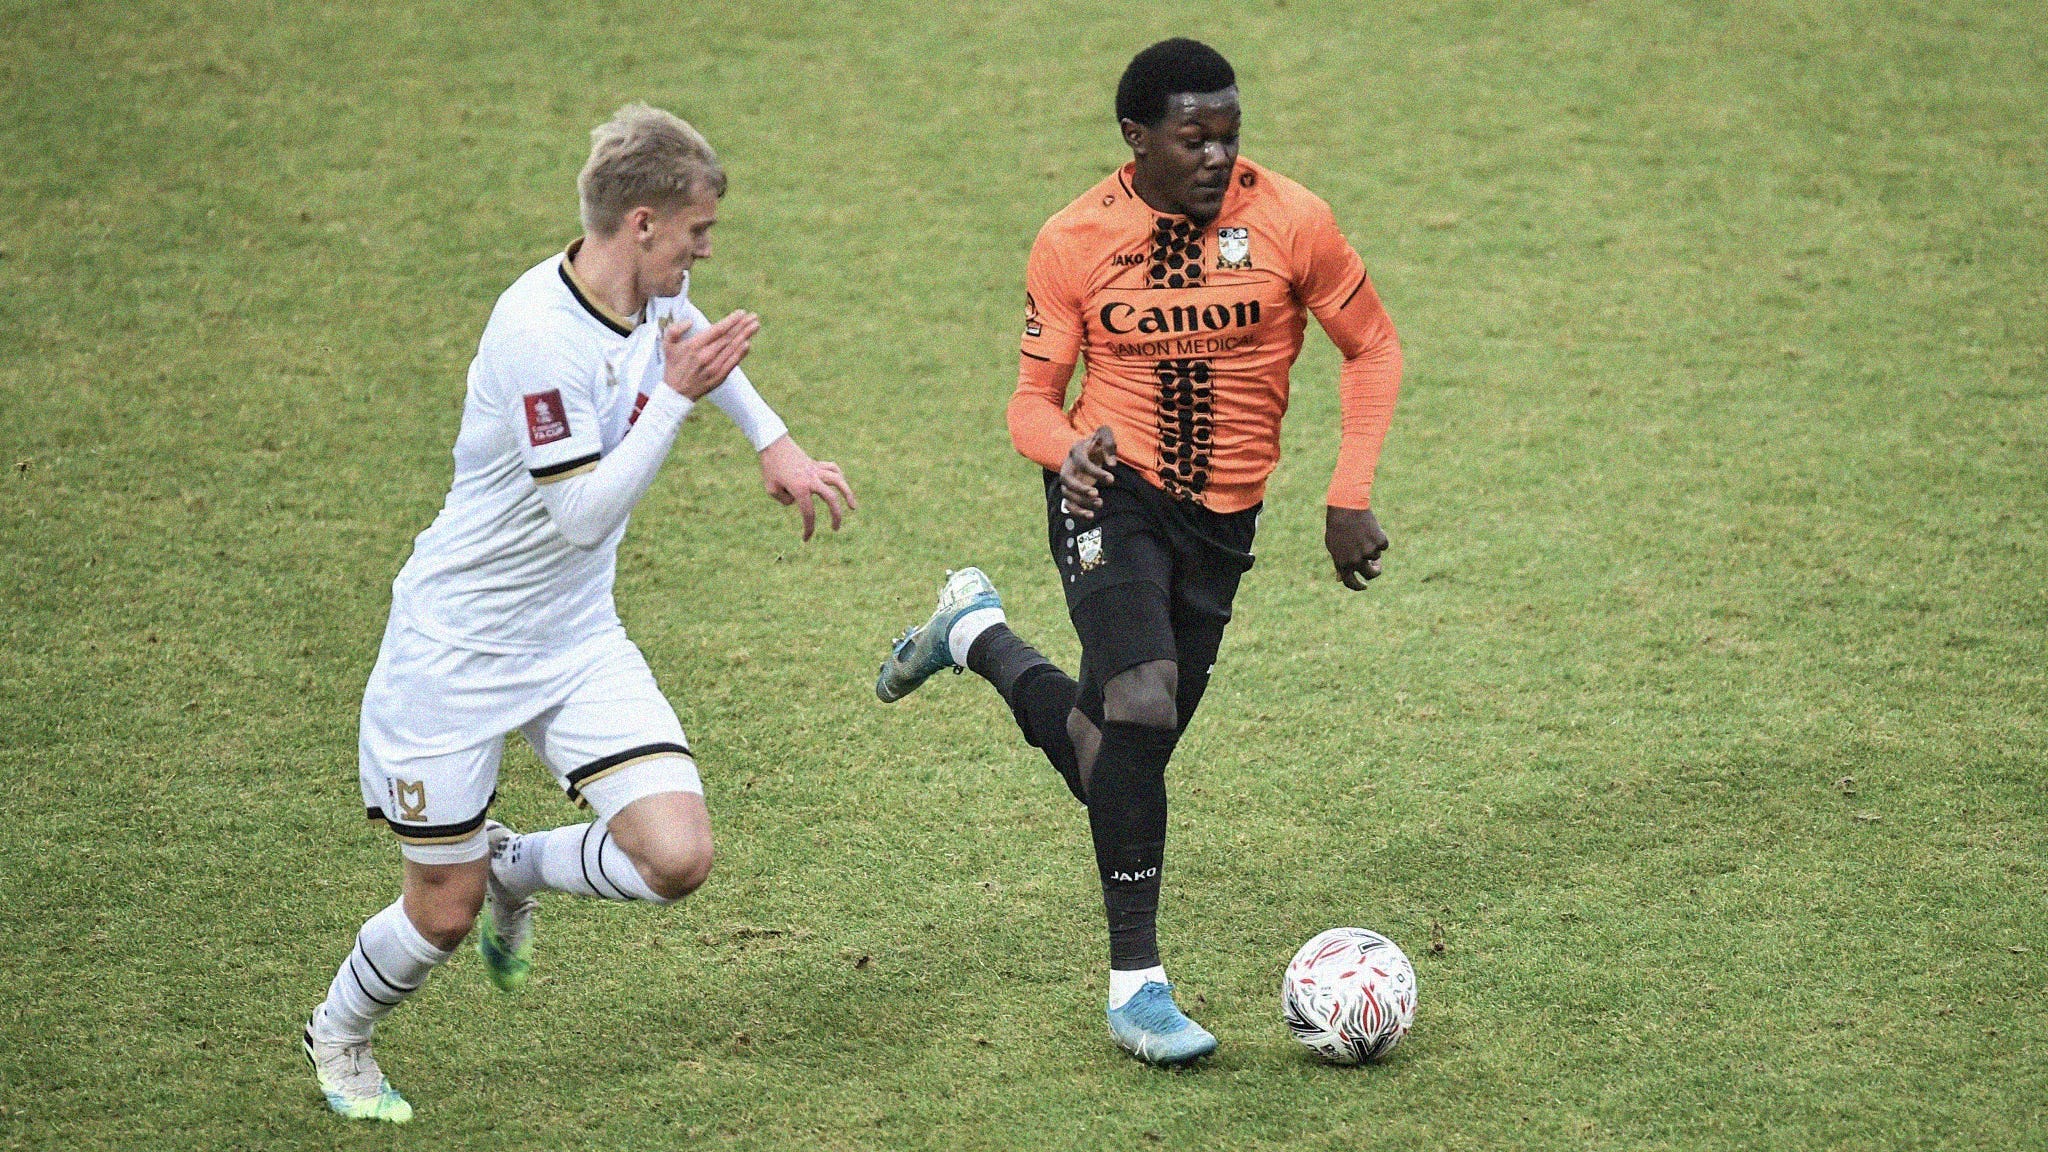 A photo of Ephron Mason-Clark running with the ball for Barnet as an MK Dons player tracks him